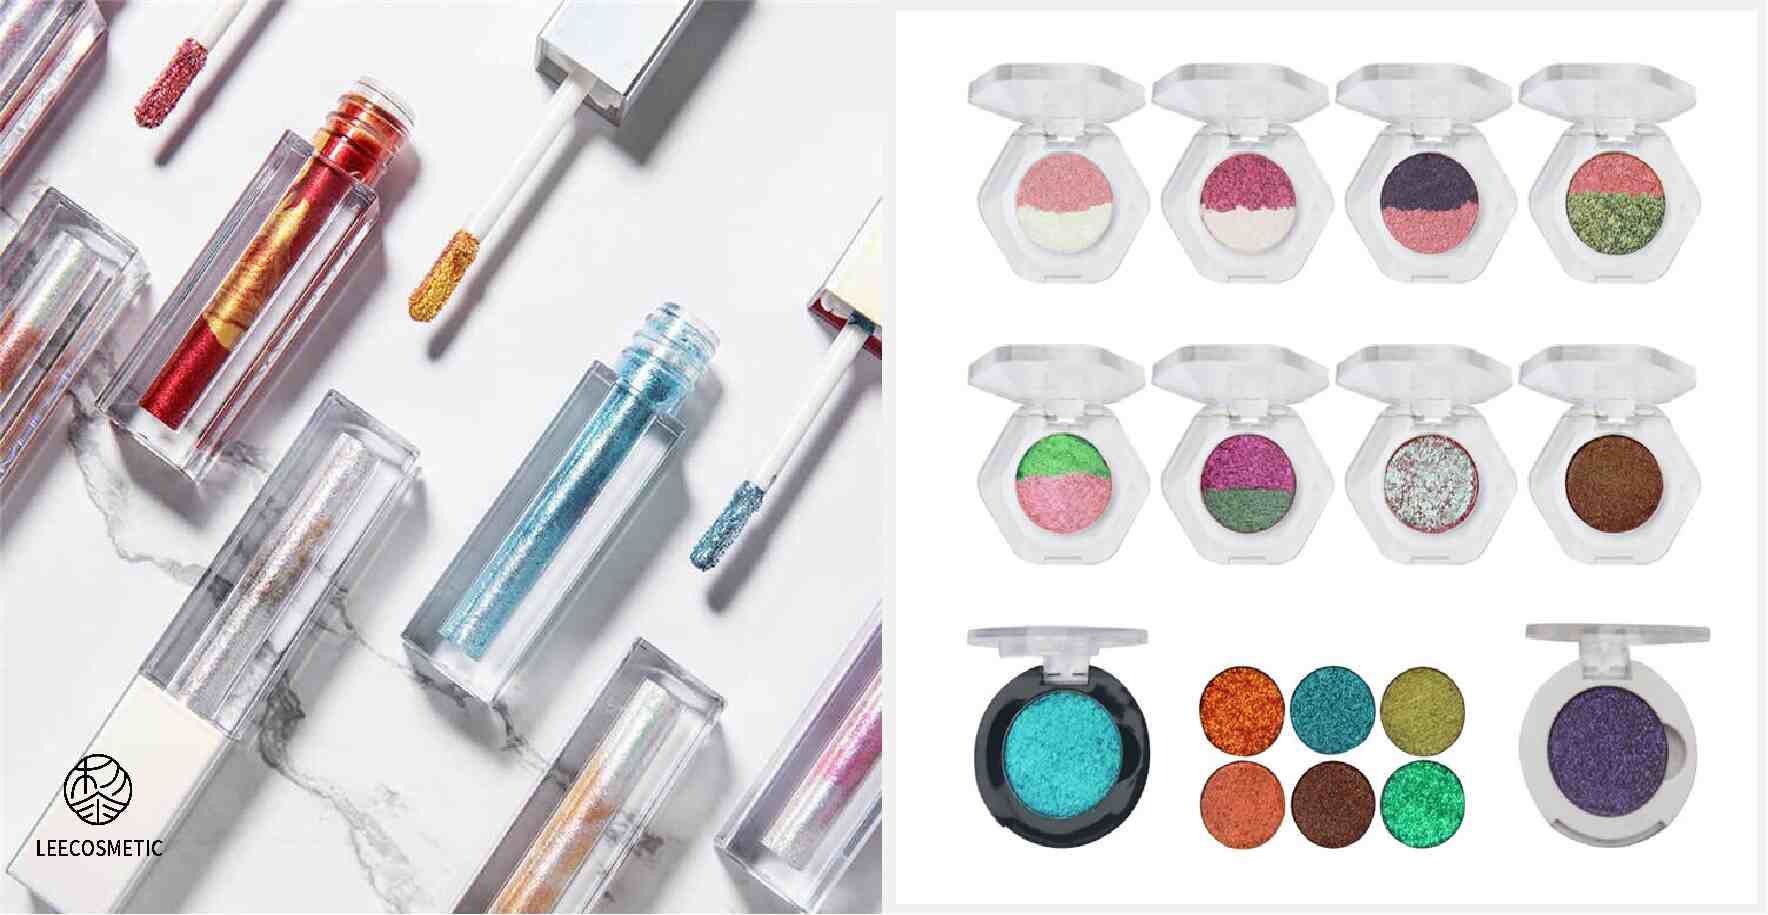 Clear/light color finish cosmetics products